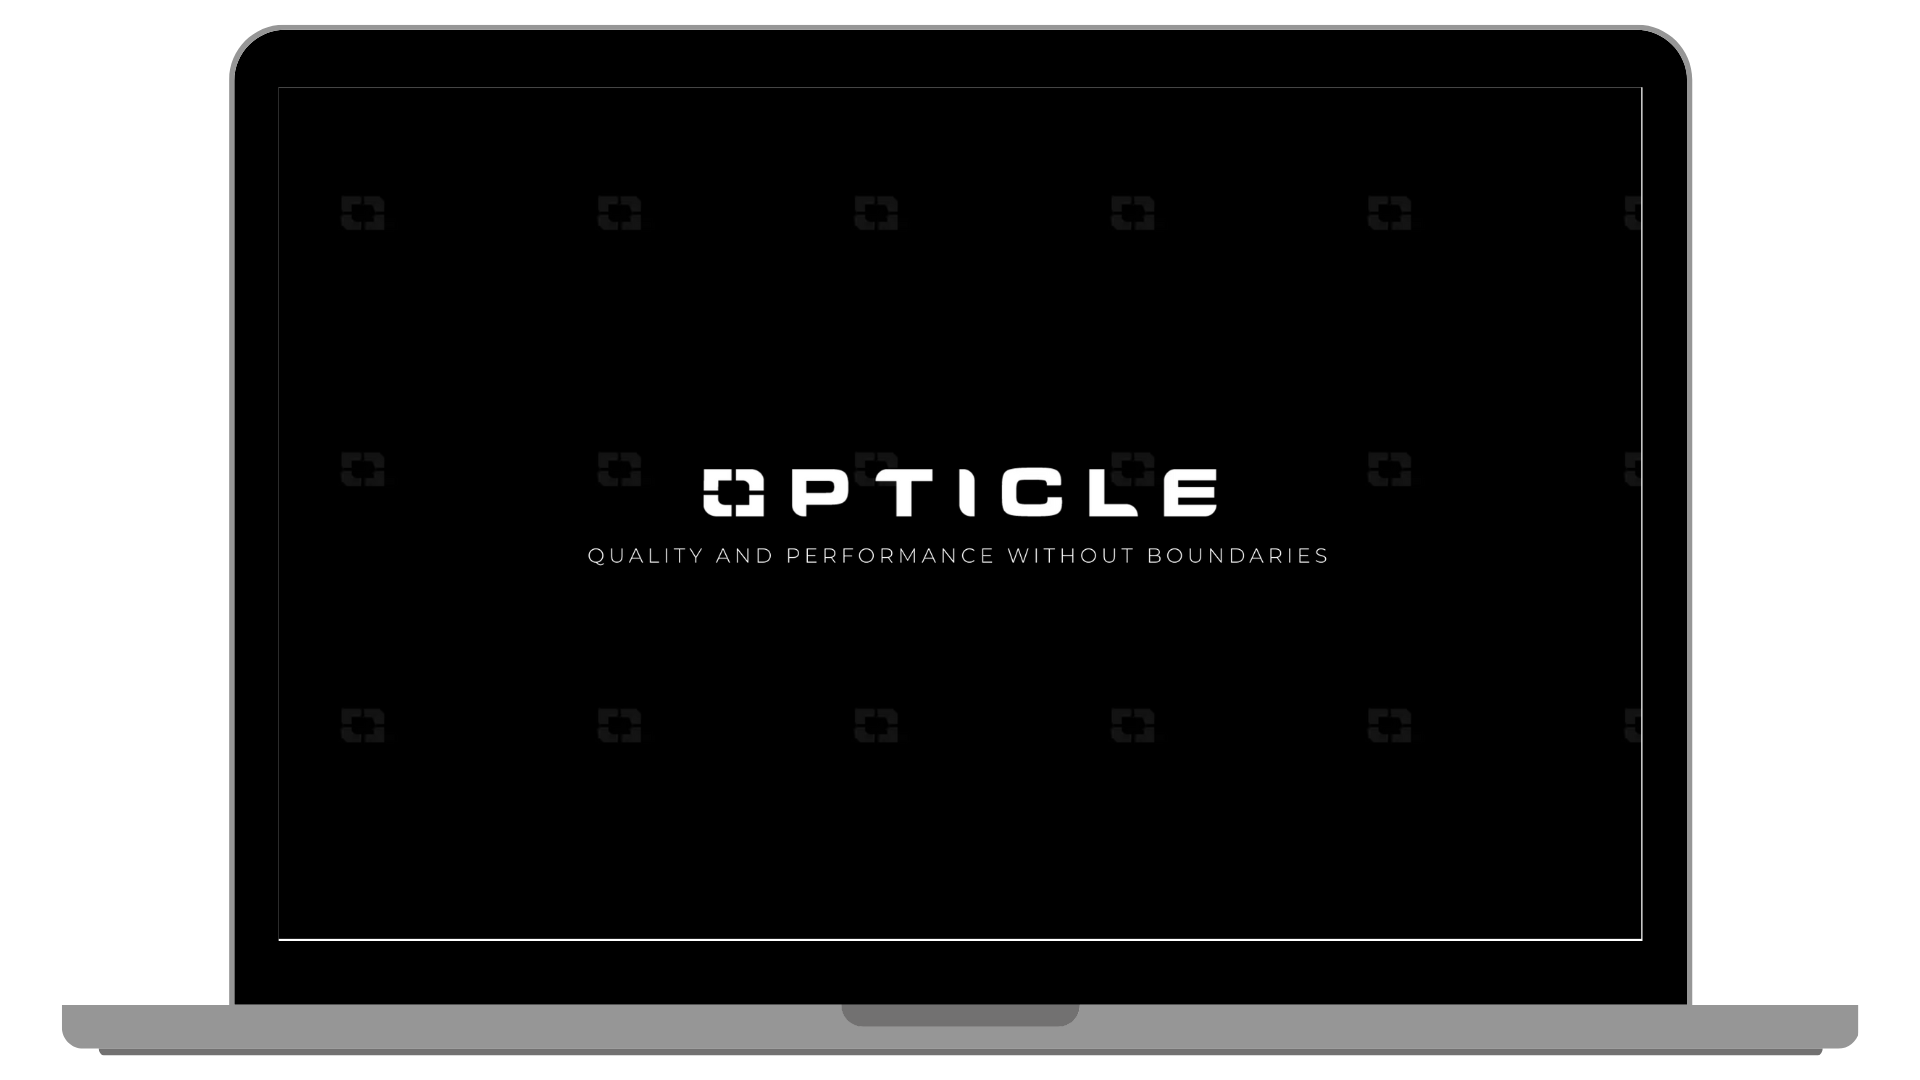 Opticle Film Website Preview from Detailers Roadmap 